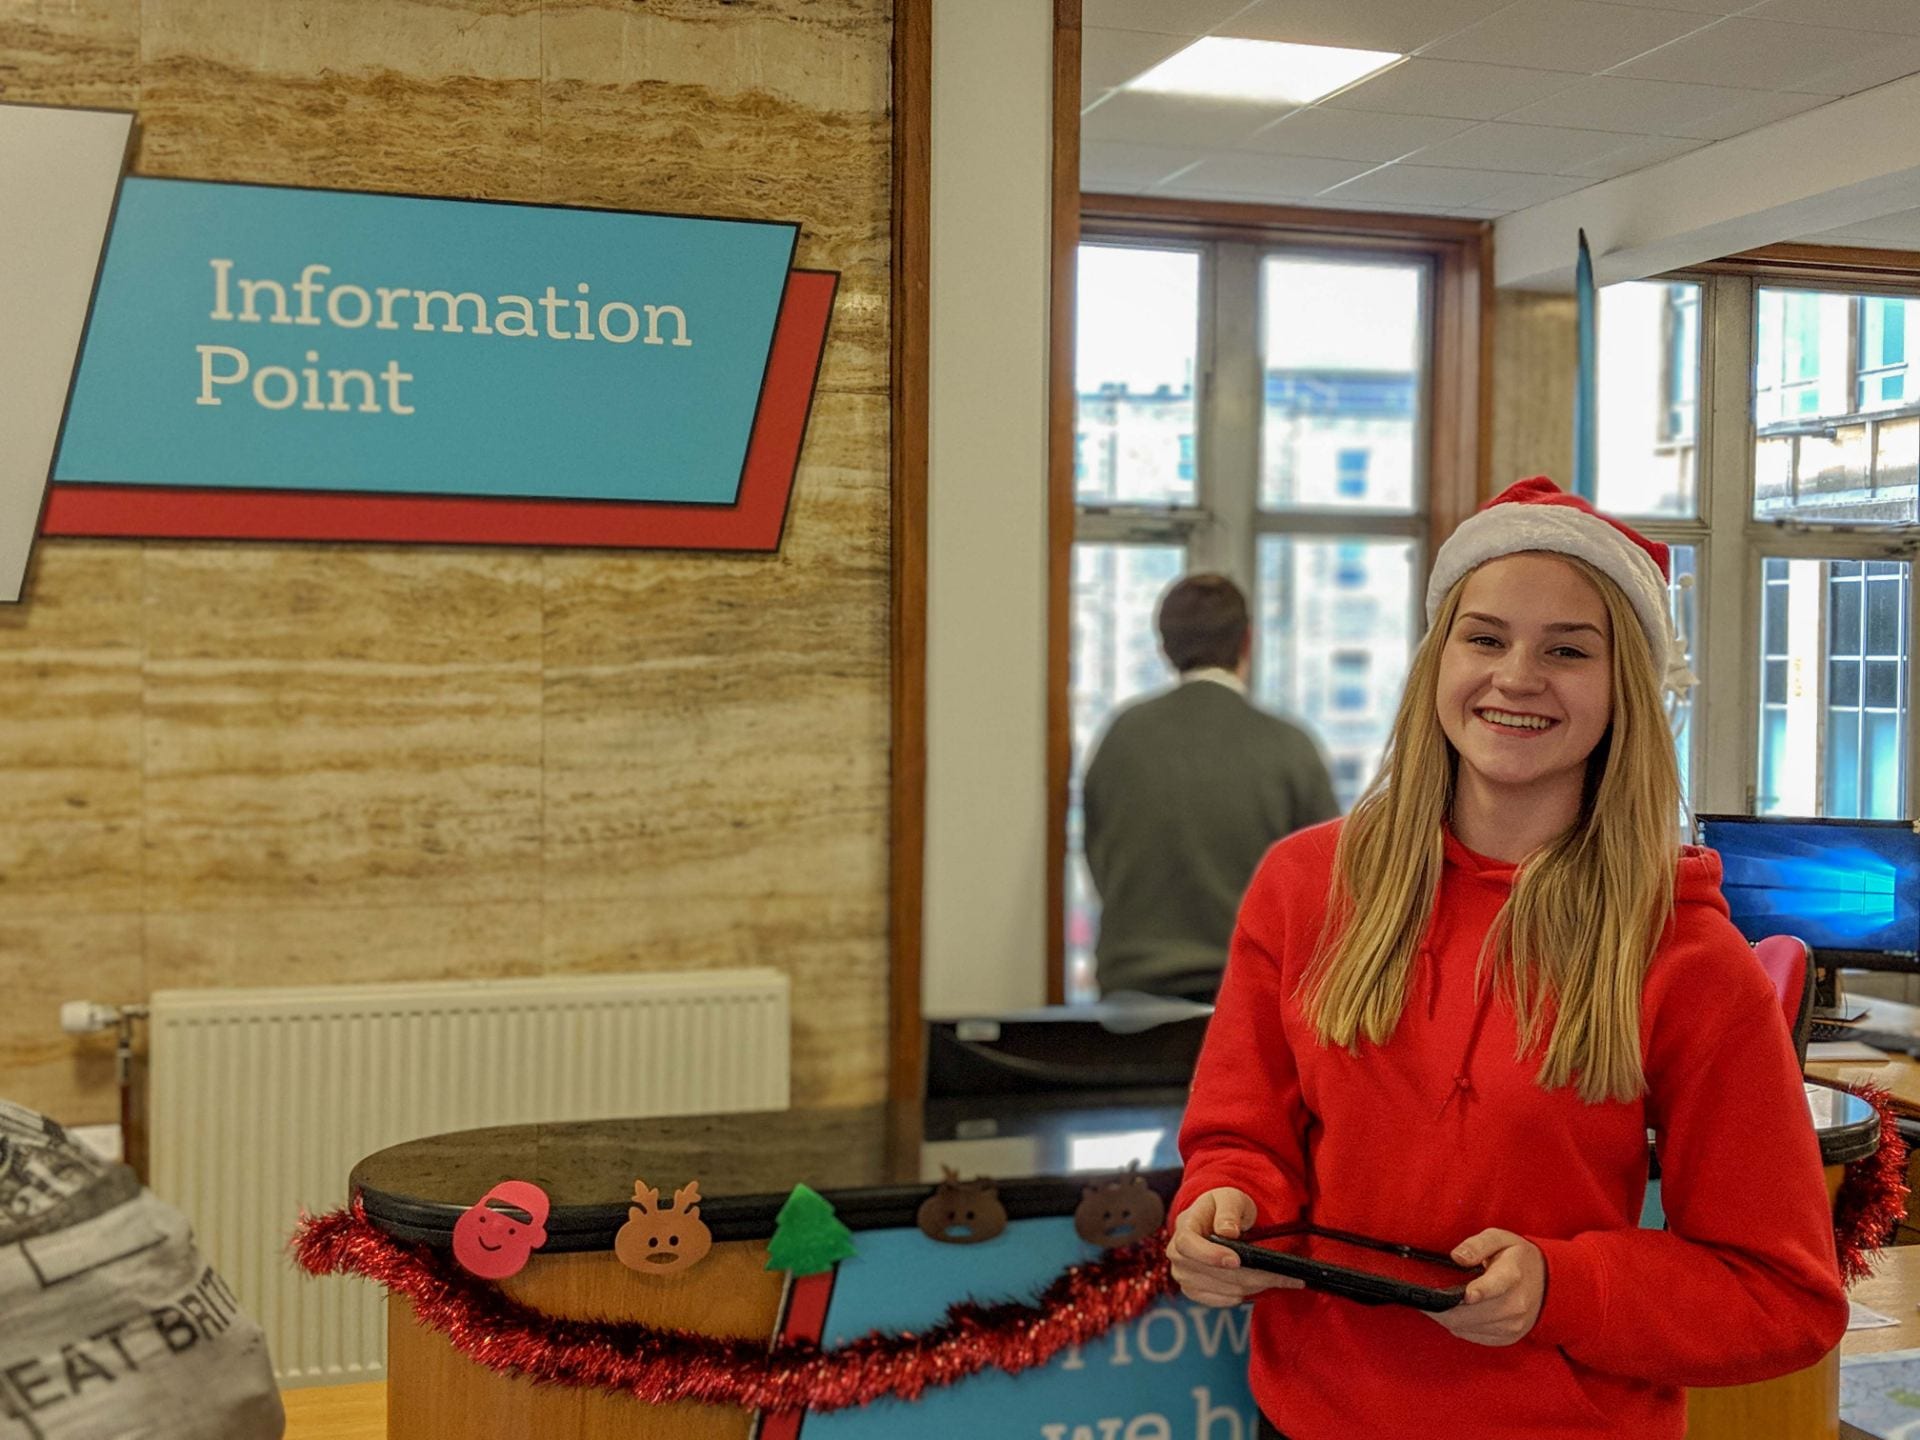 Olivia stands in front of the Information Point desk with an iPad in her hands